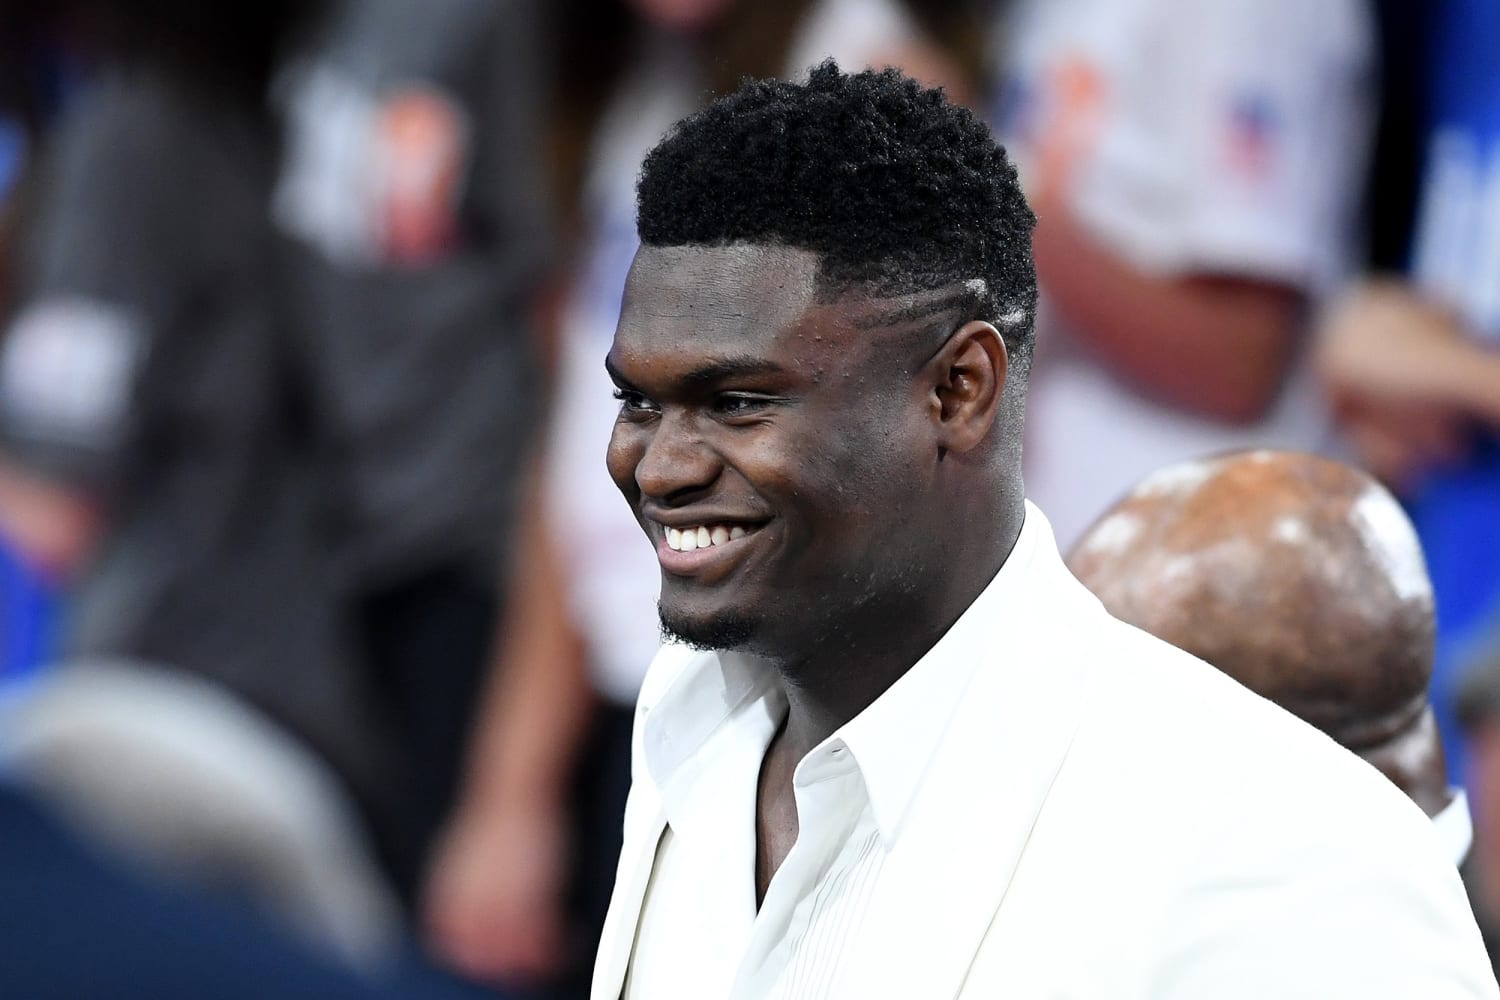 NBA draft: Zion Williamson goes to New Orleans Pelicans at No. 1